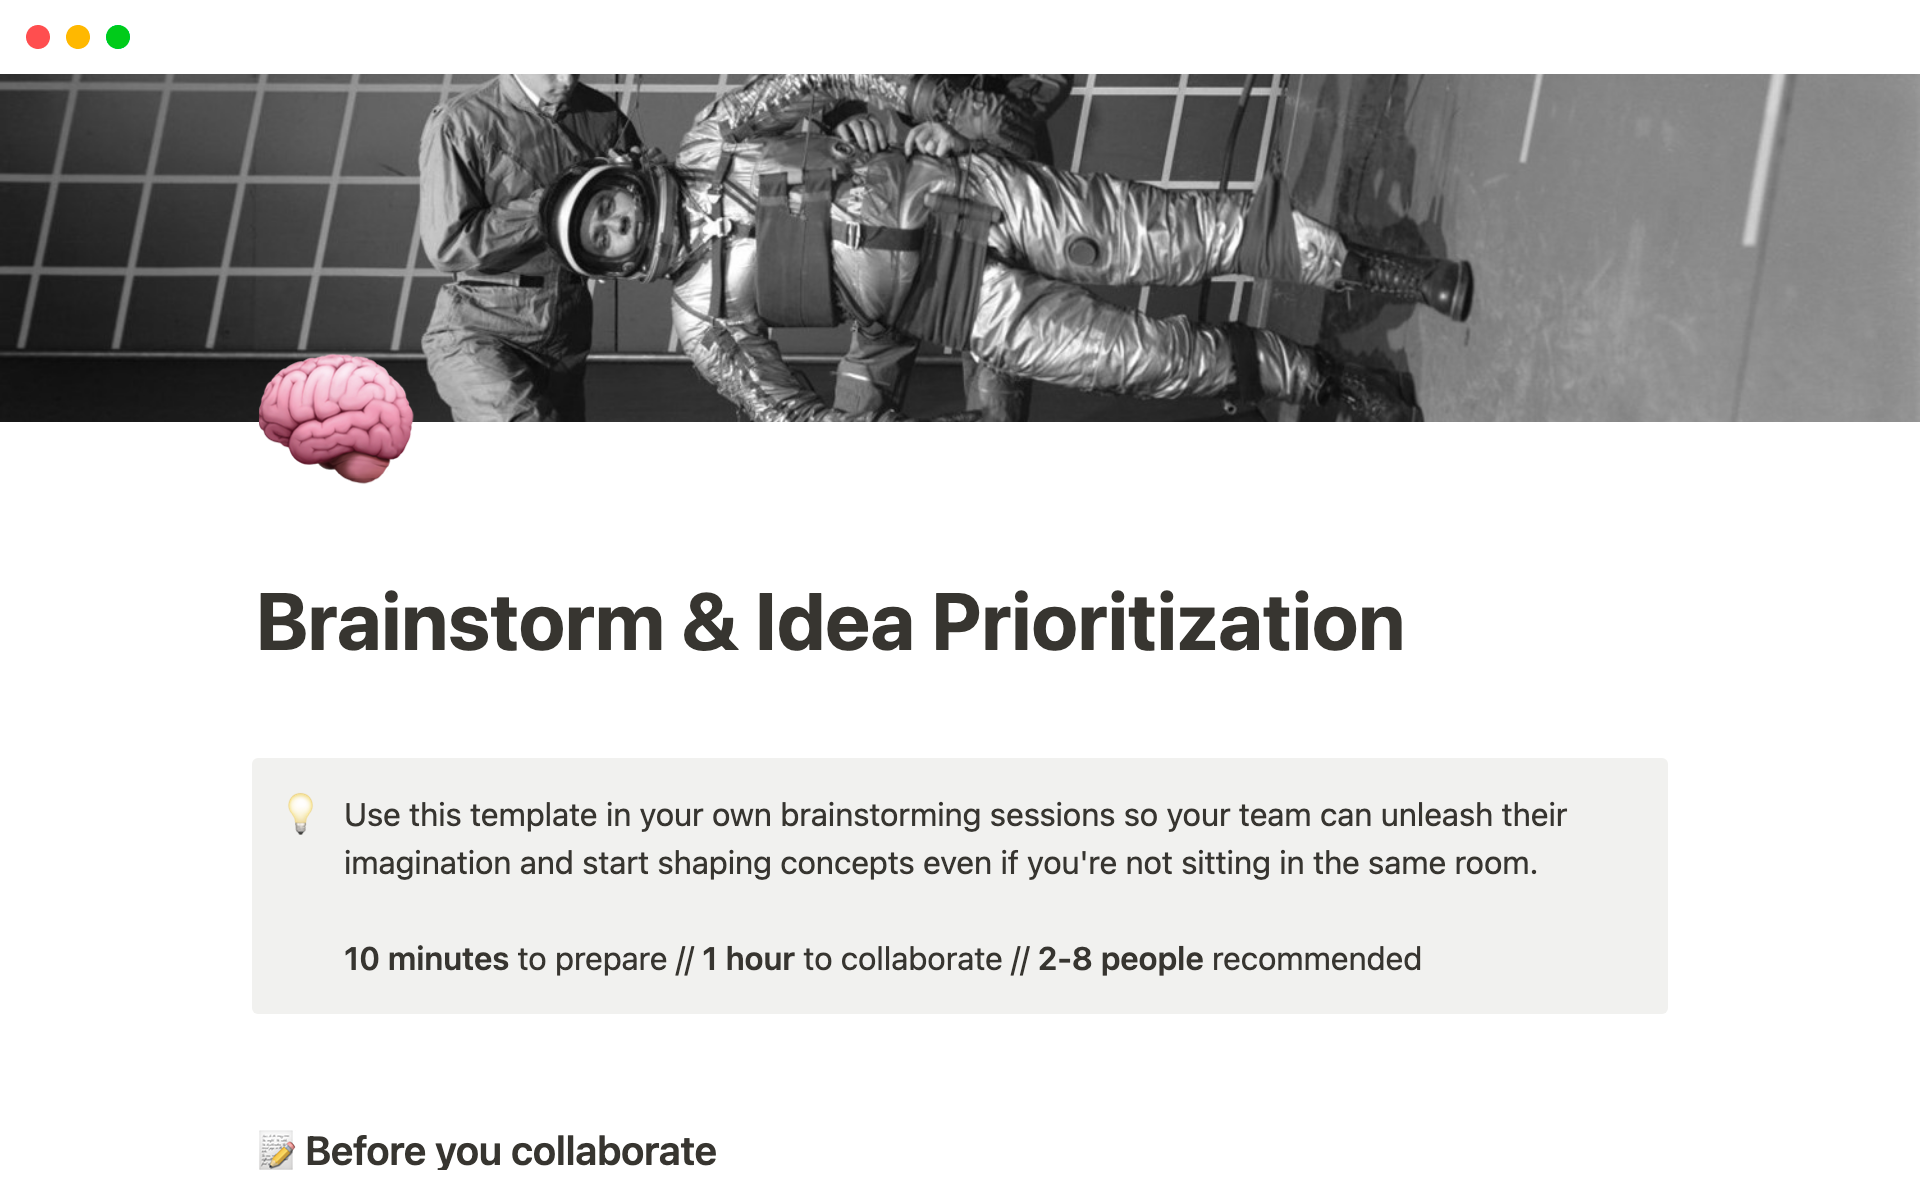 Use this template in your own brainstorming sessions so your team can unleash their imagination and start shaping concepts even if you're not sitting in the same room.